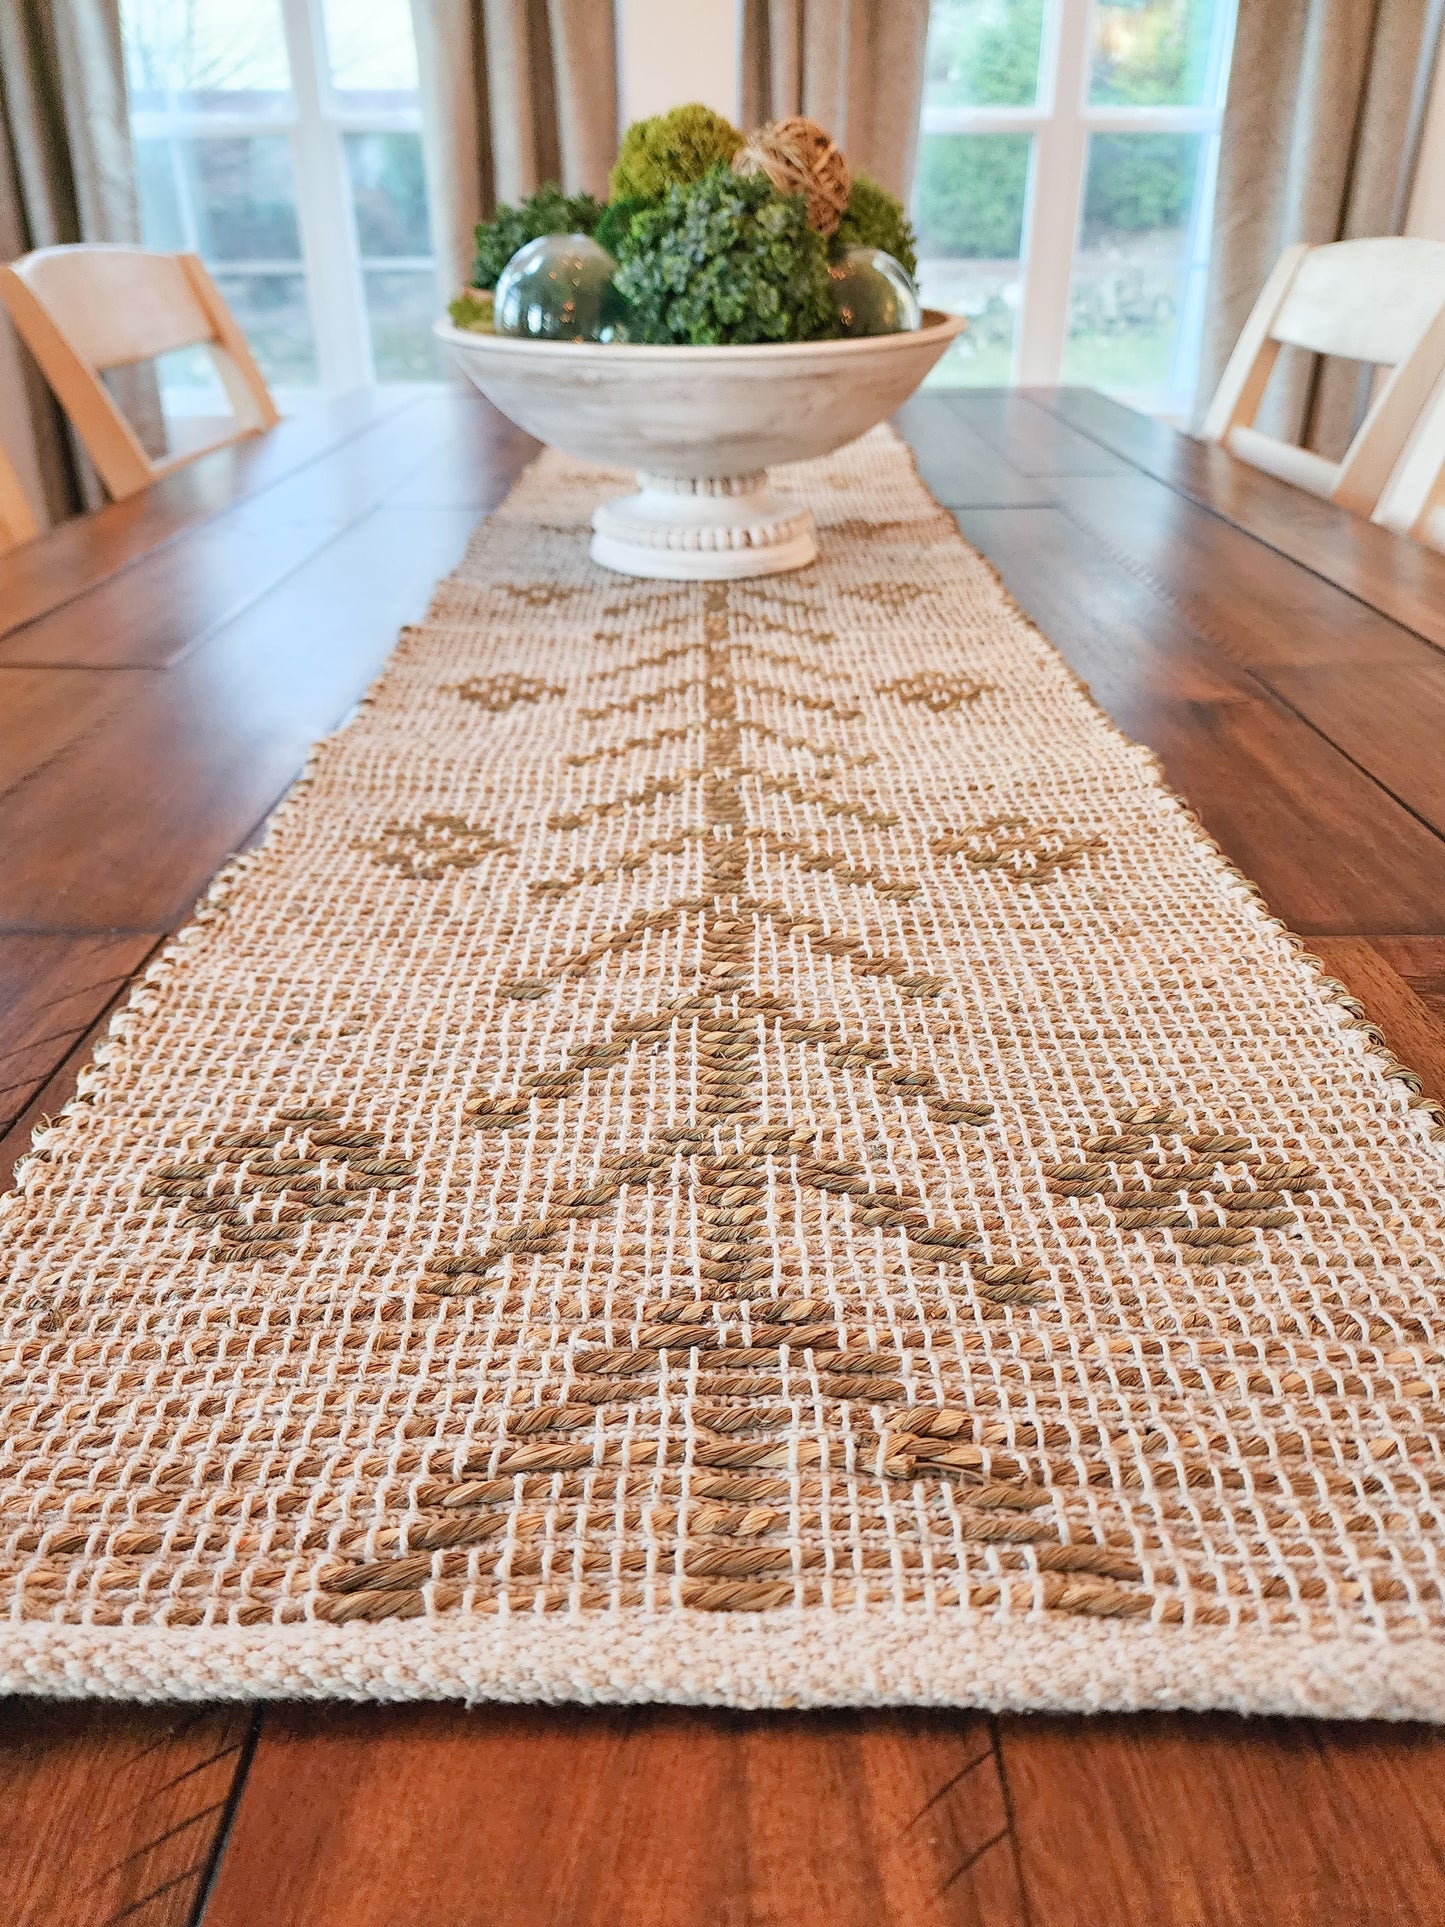 Hand-Woven Seagrass & Cotton Table Runner w/ Design